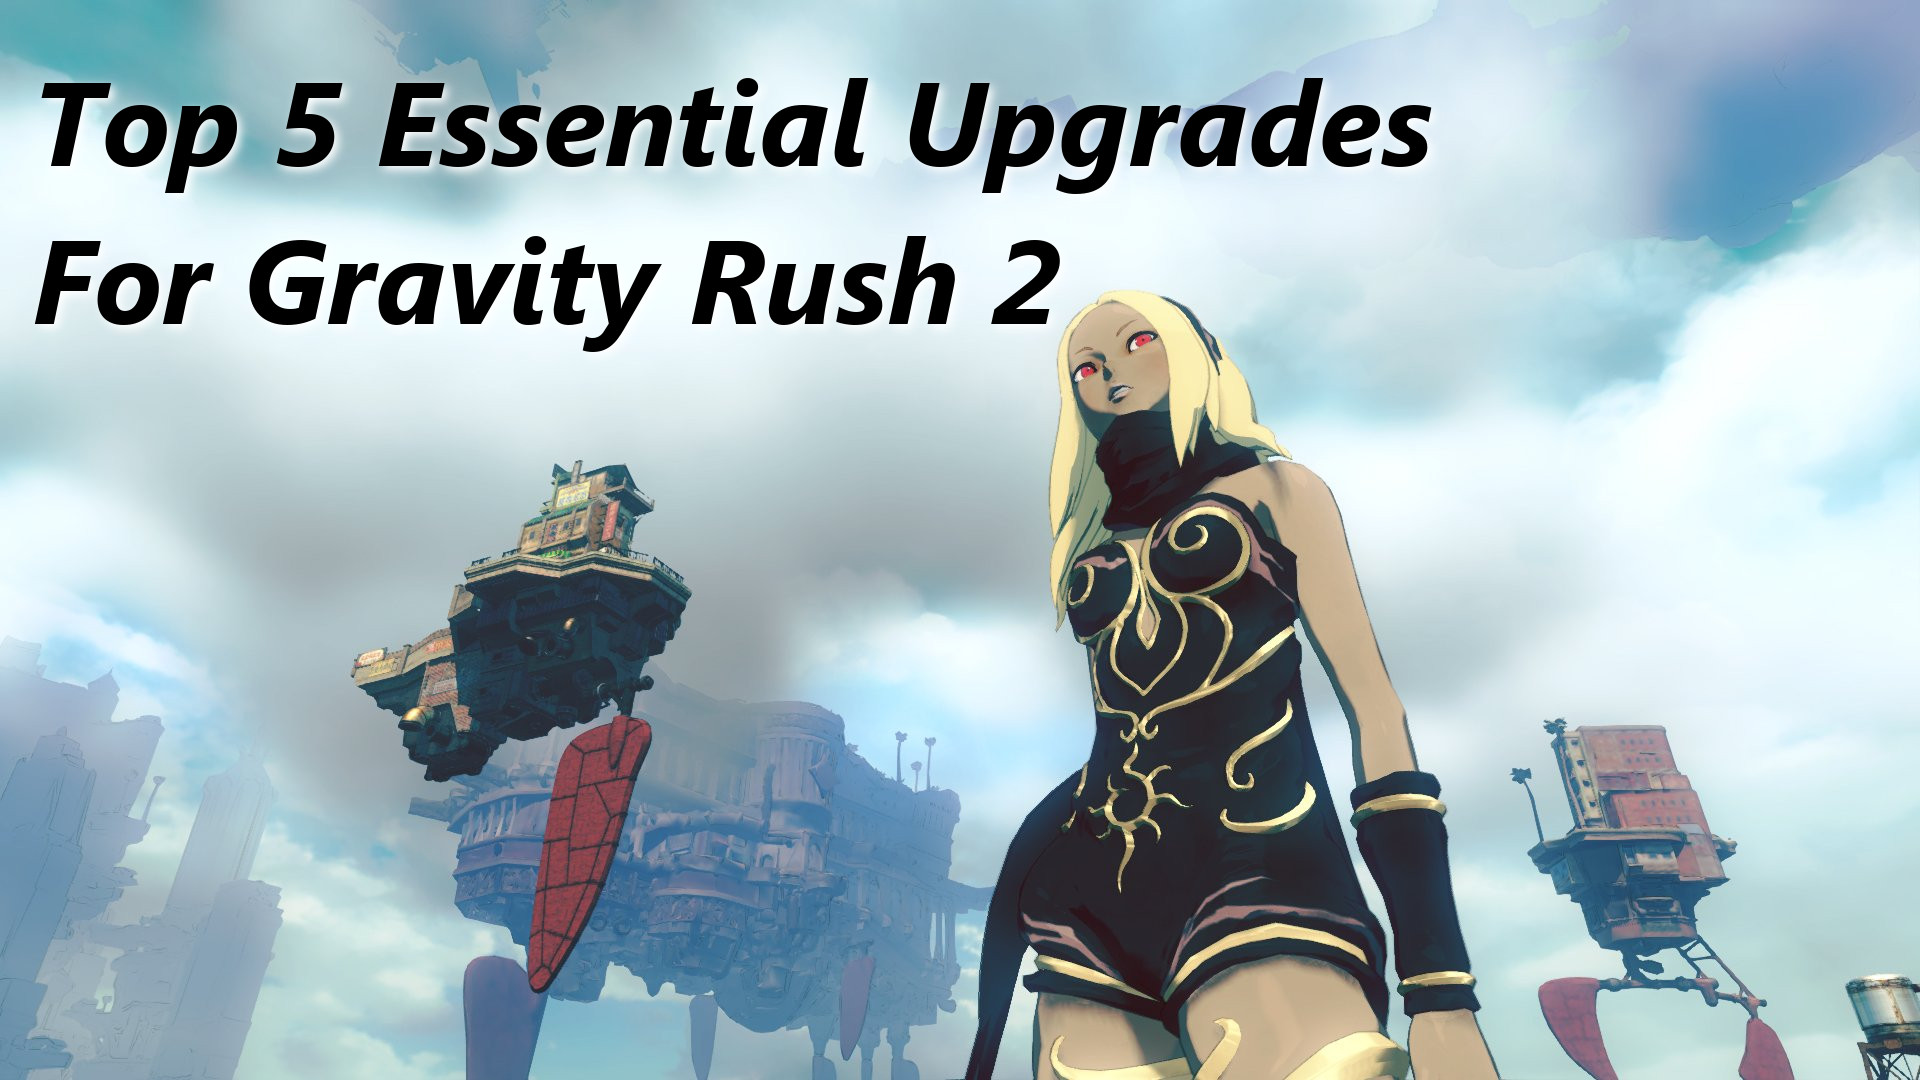 Top 5 Essential Upgrades For Gravity Rush 2